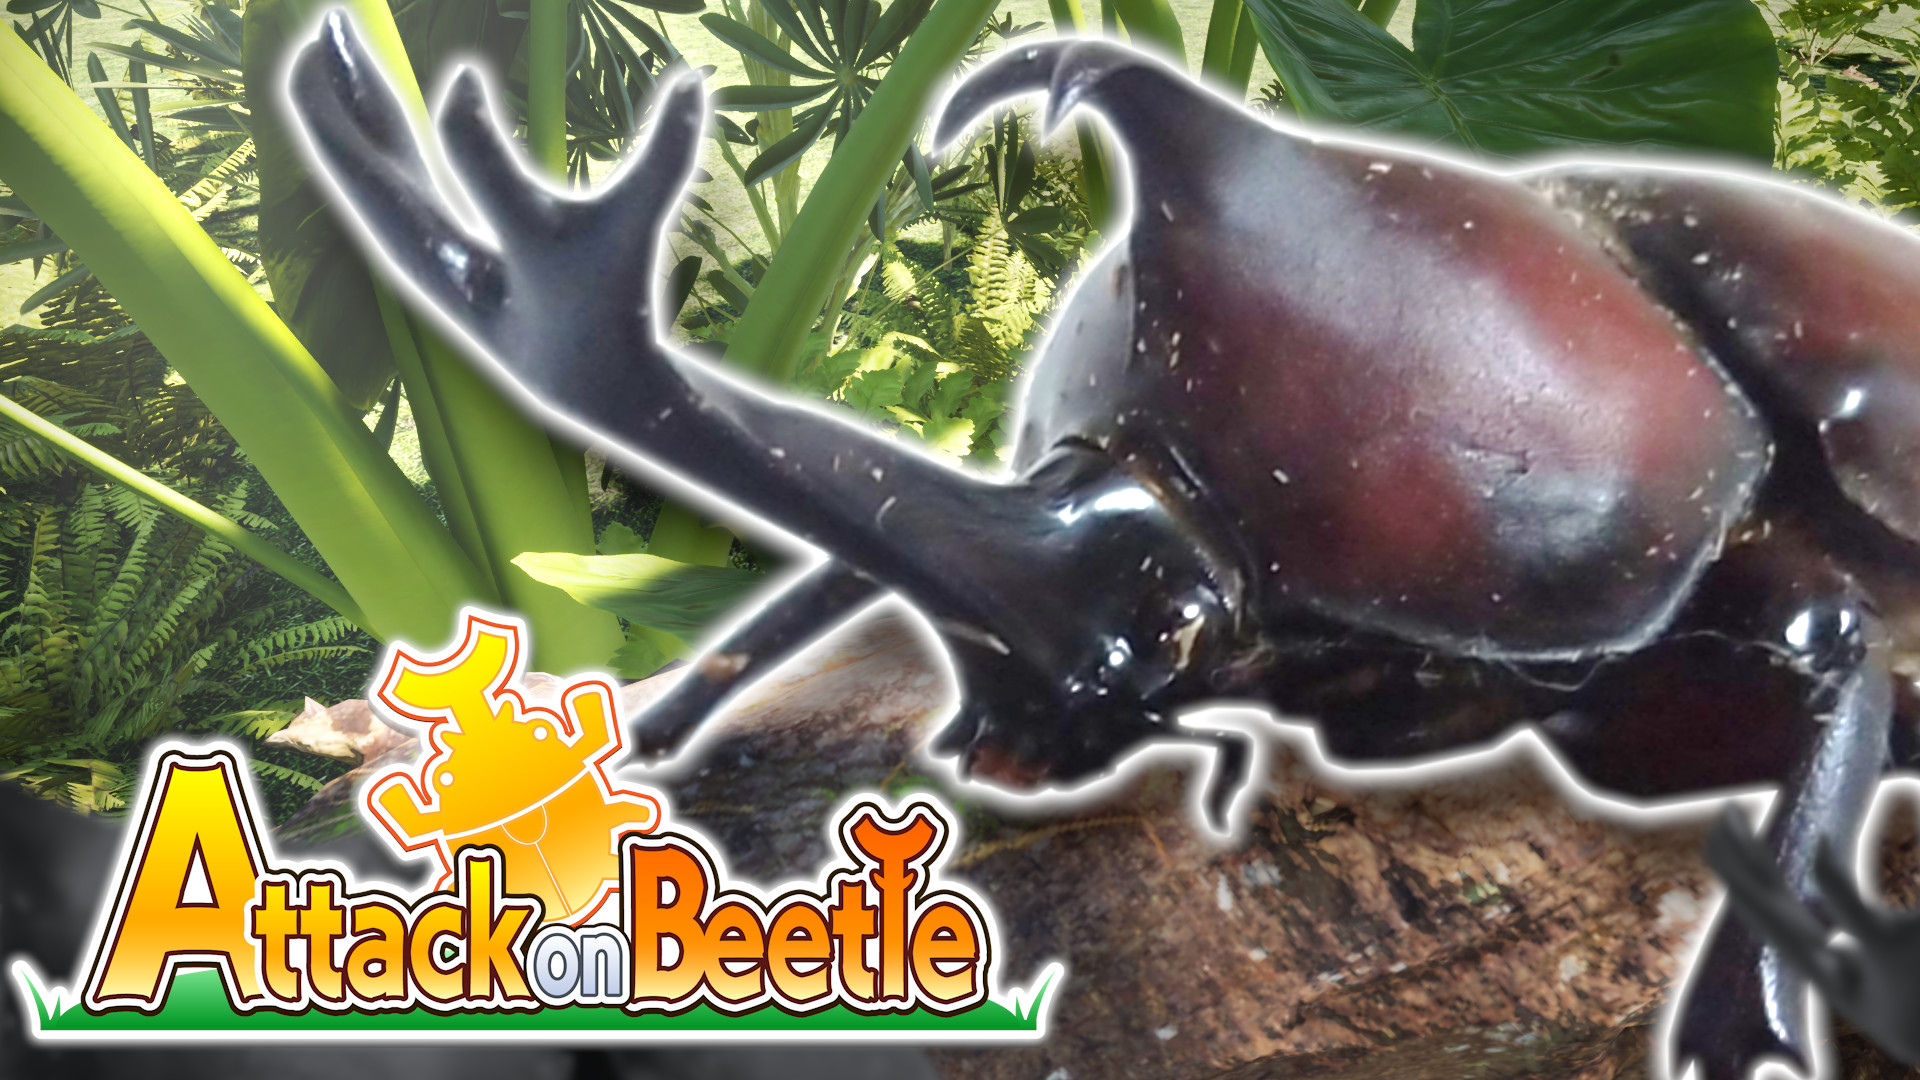 Attack on Beetle - Screenshots Switch